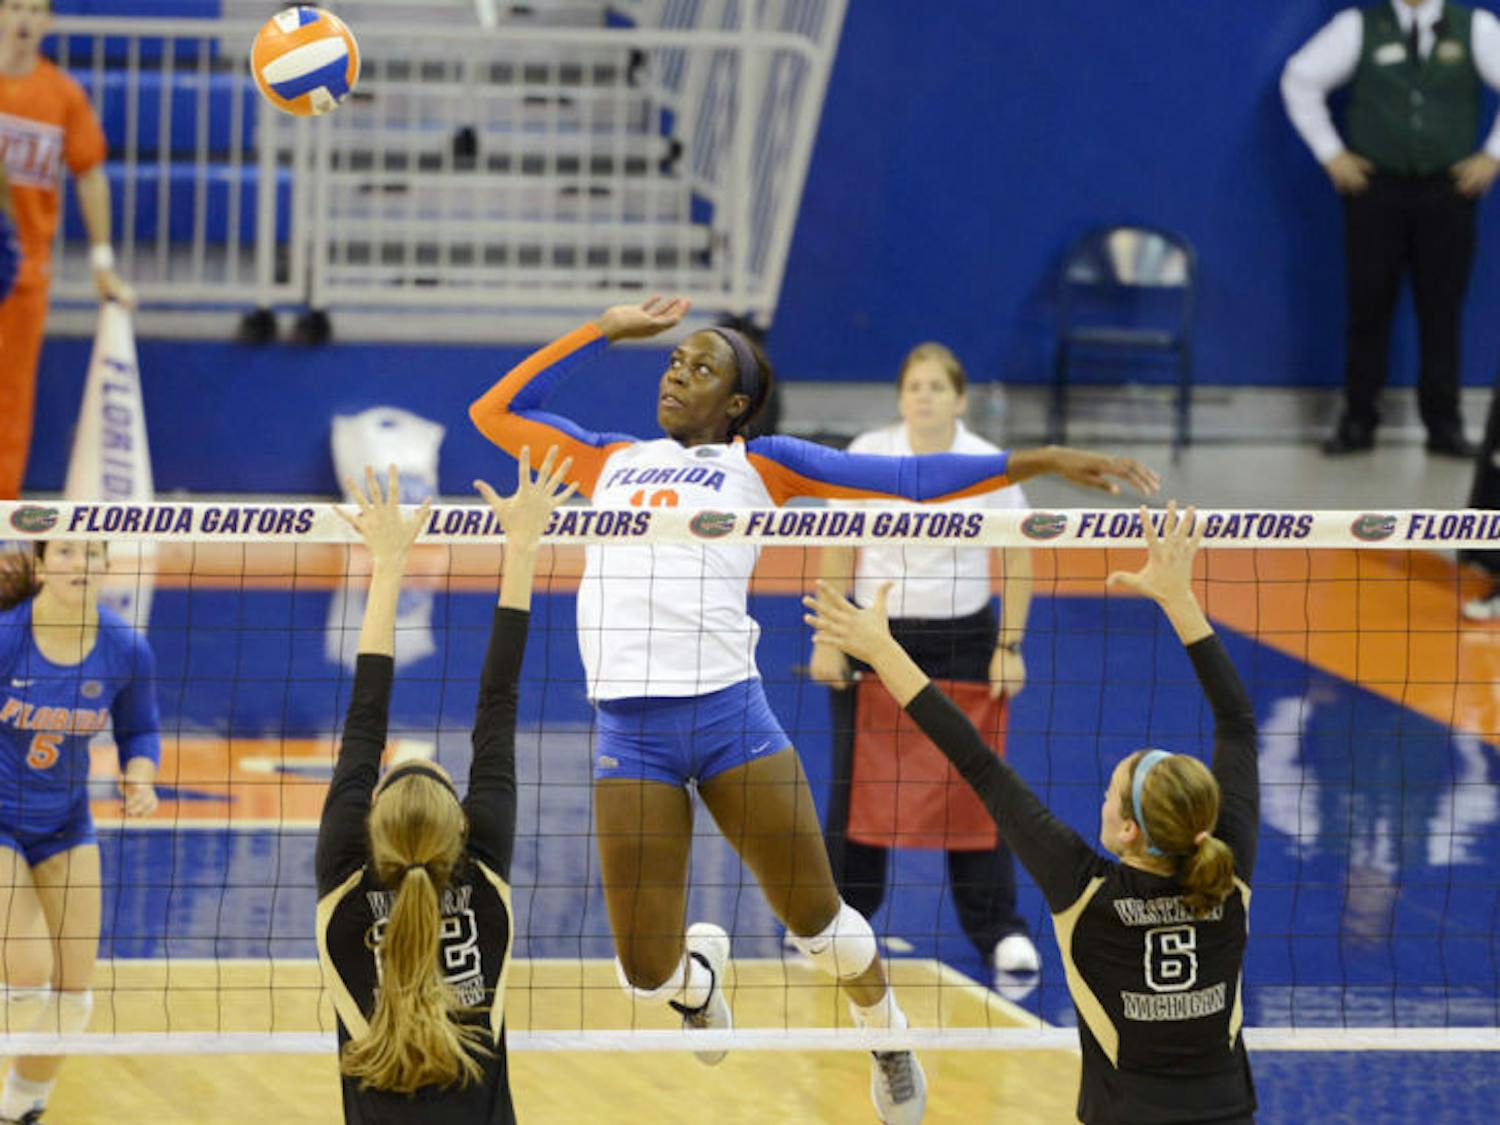 Chloe Mann jumps to spike the ball during Florida’s four-set victory against Western Michigan in the O’Connell Center on Sept. 14